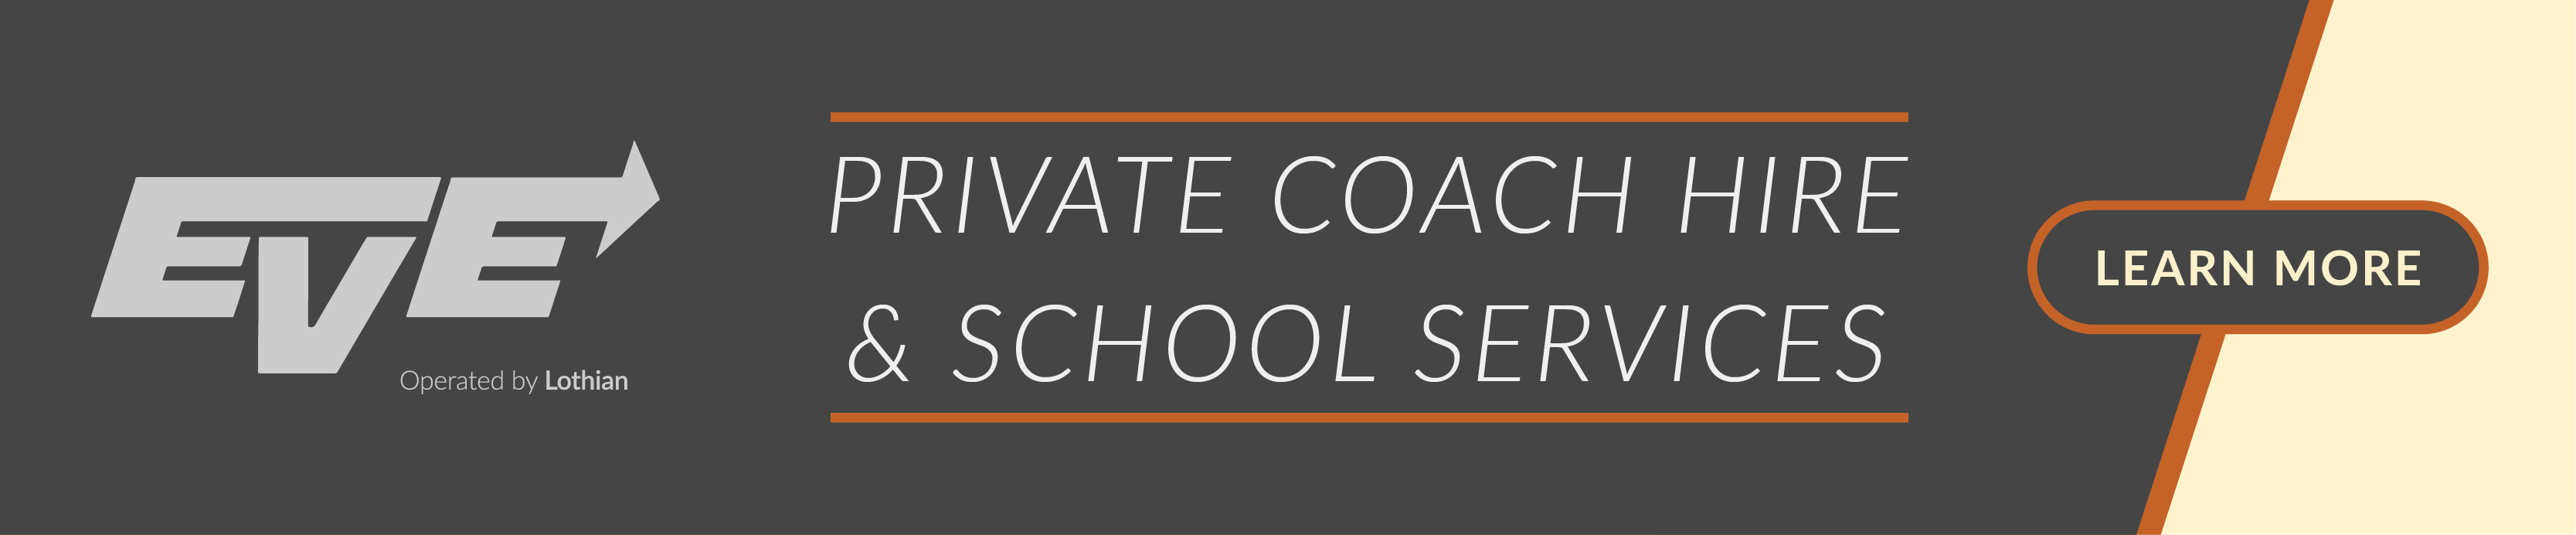 Eve Coaches: Click to learn more about our private coach hire and school services.